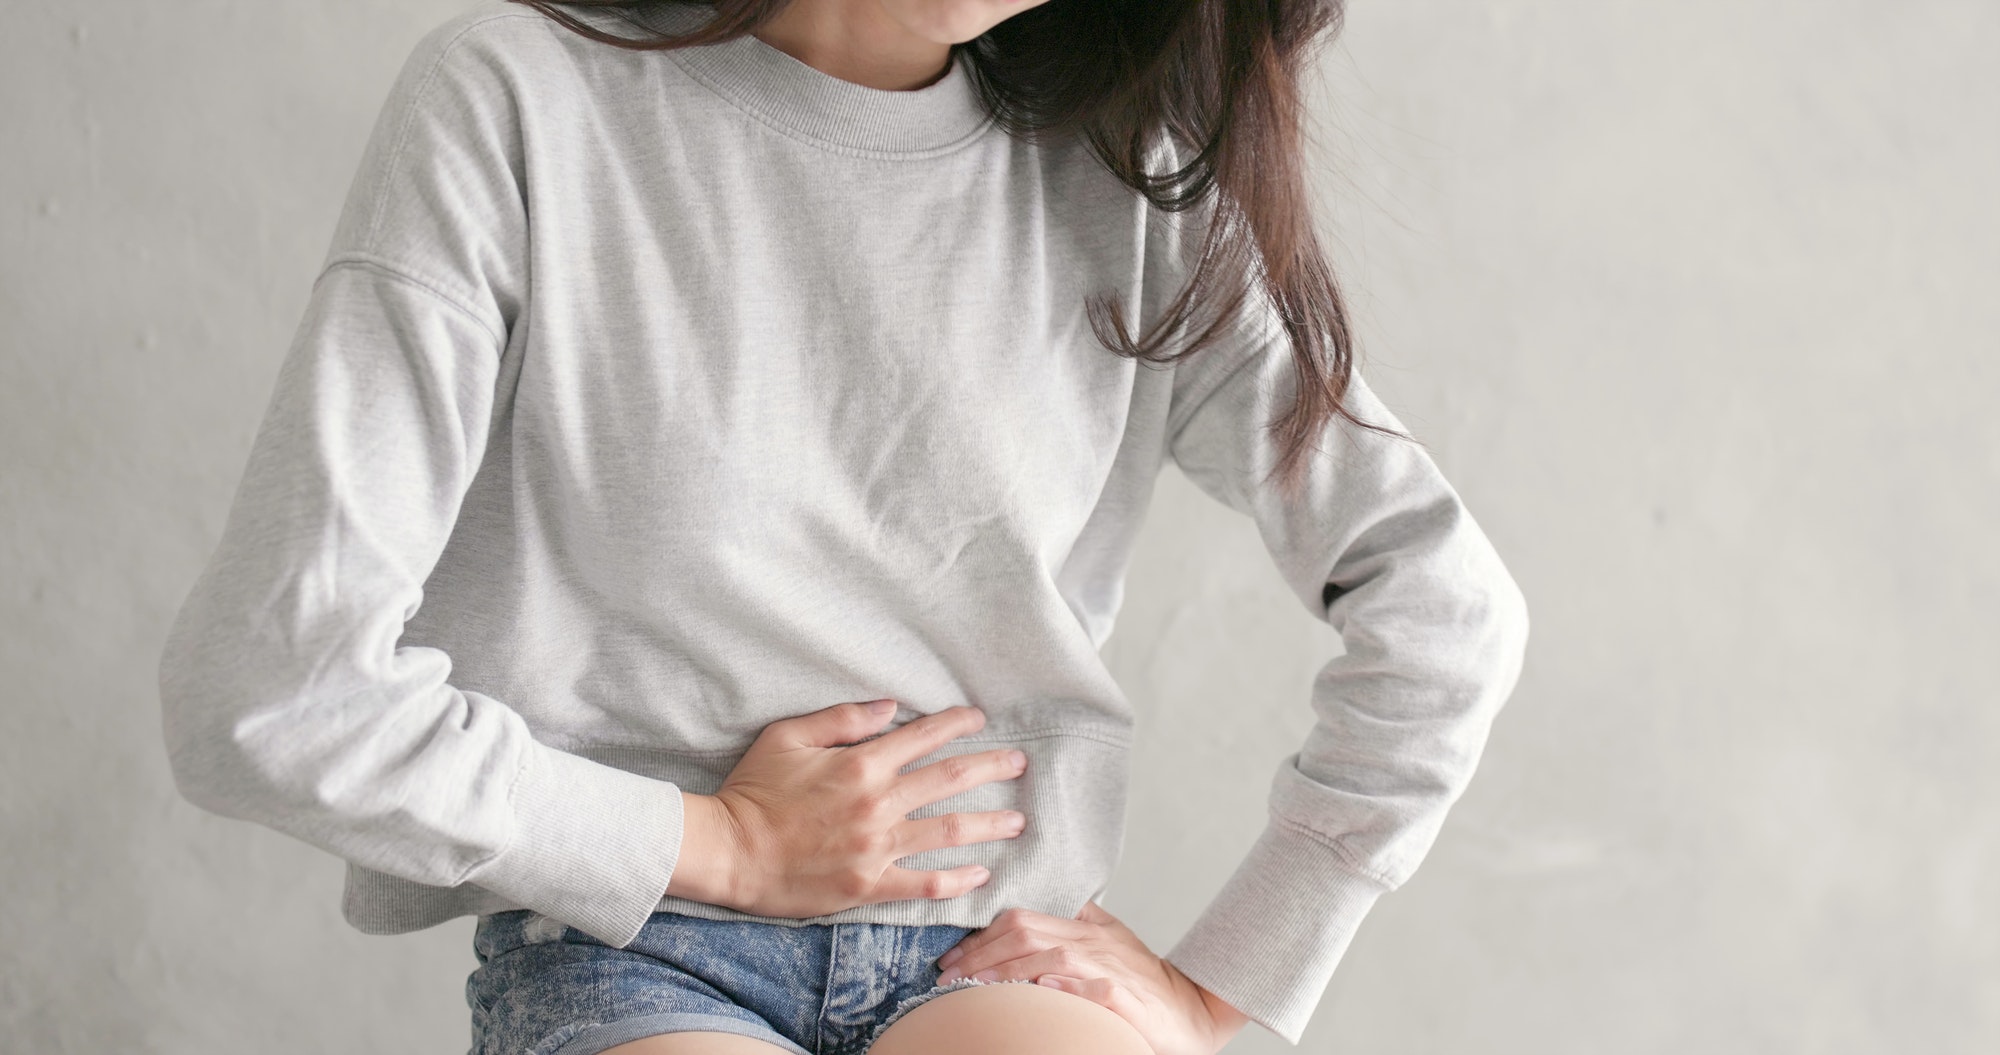 Woman suffer from stomach pain